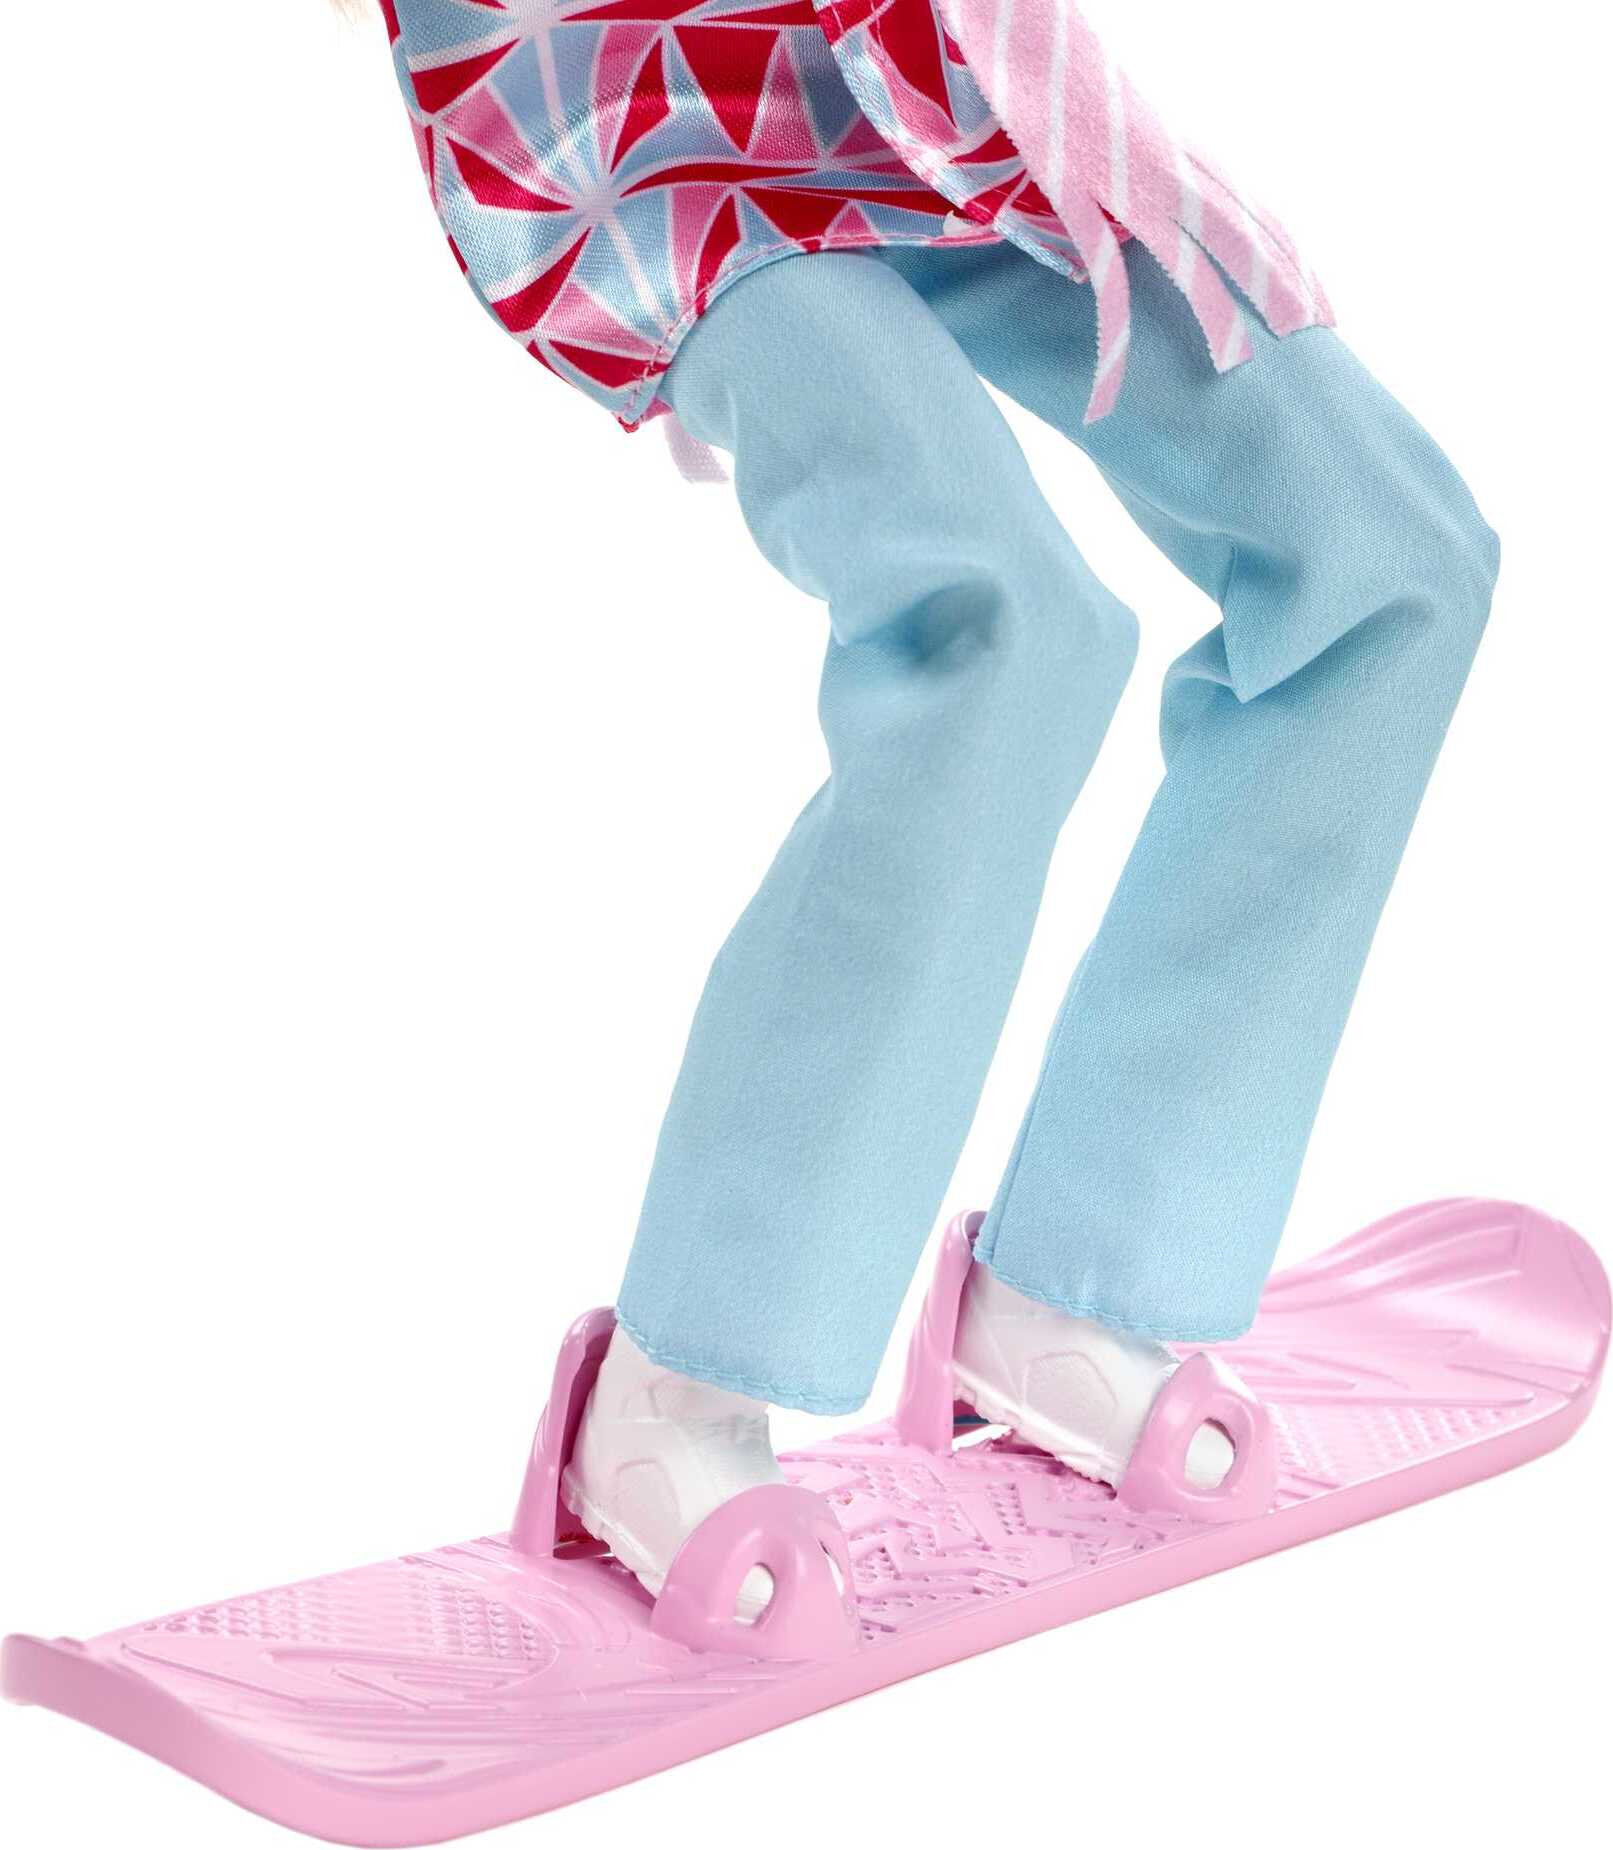 Barbie Snowboarder Fashion Doll Dressed in Jacket, Pants & Helmet, with Blonde Hair - image 5 of 6